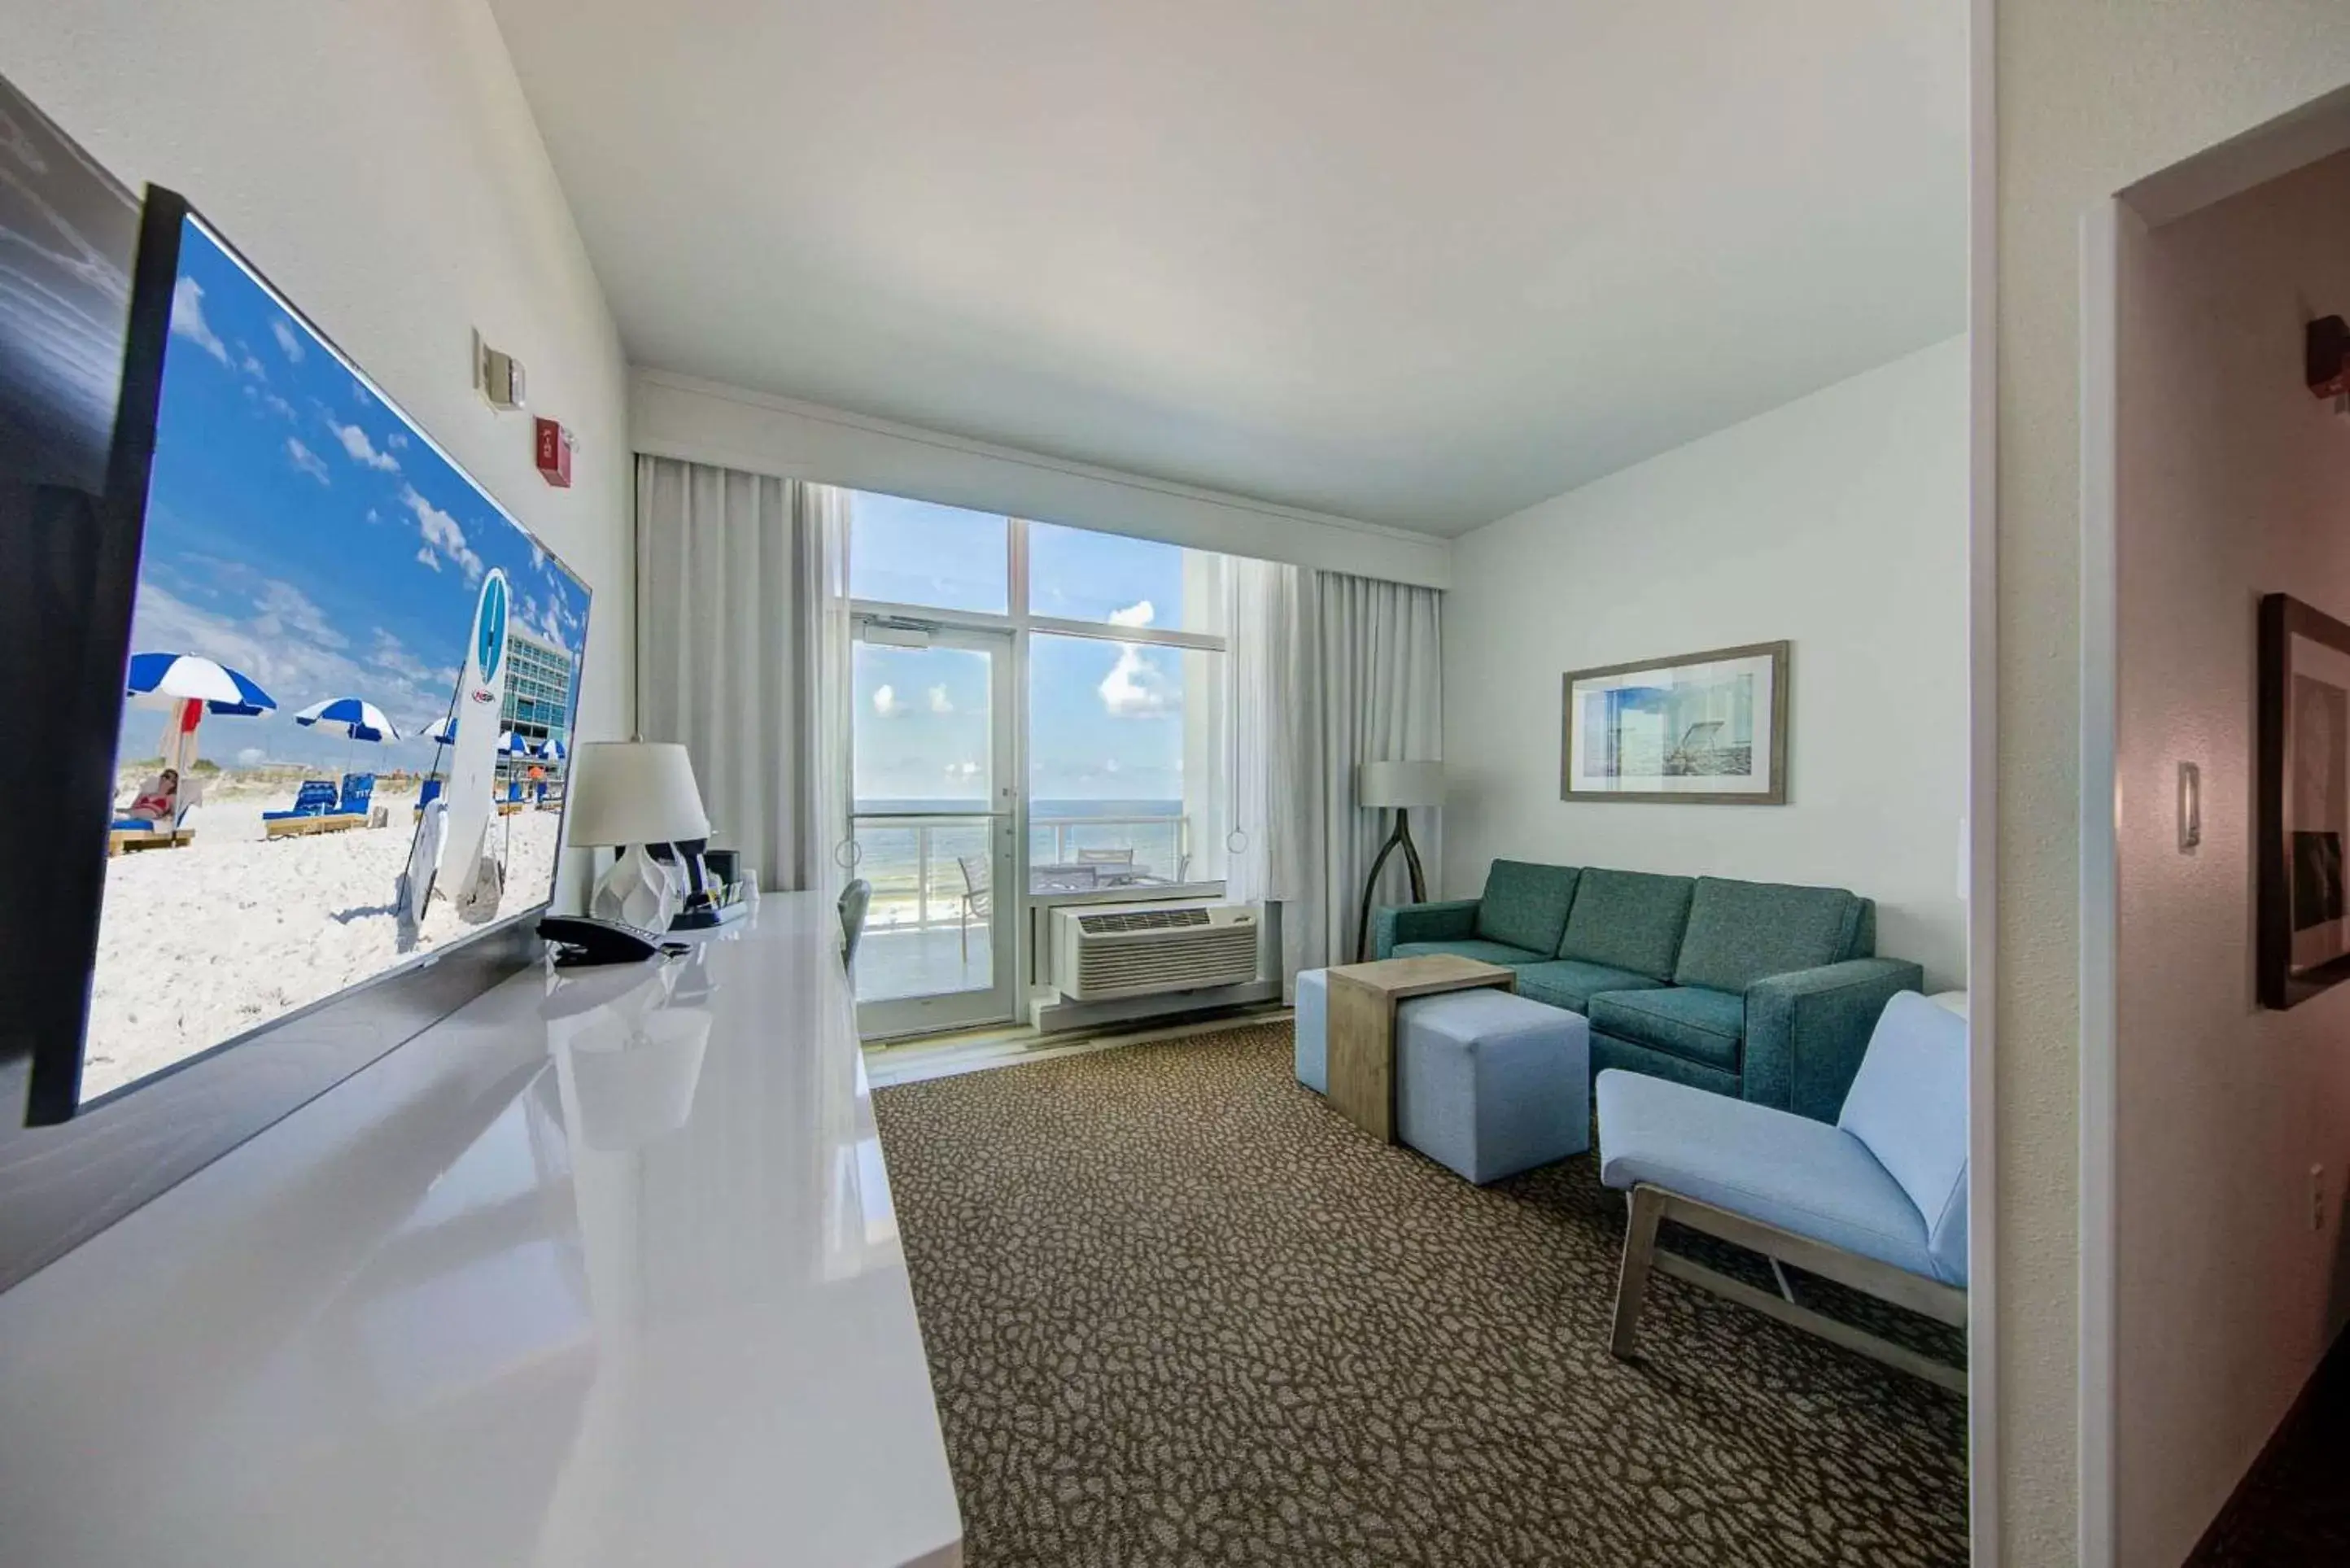 Corner King Suite with Bunk Beds and Sofa Bed - Bath Tub/Beach Front/Mobility Accessible in Best Western Premier - The Tides